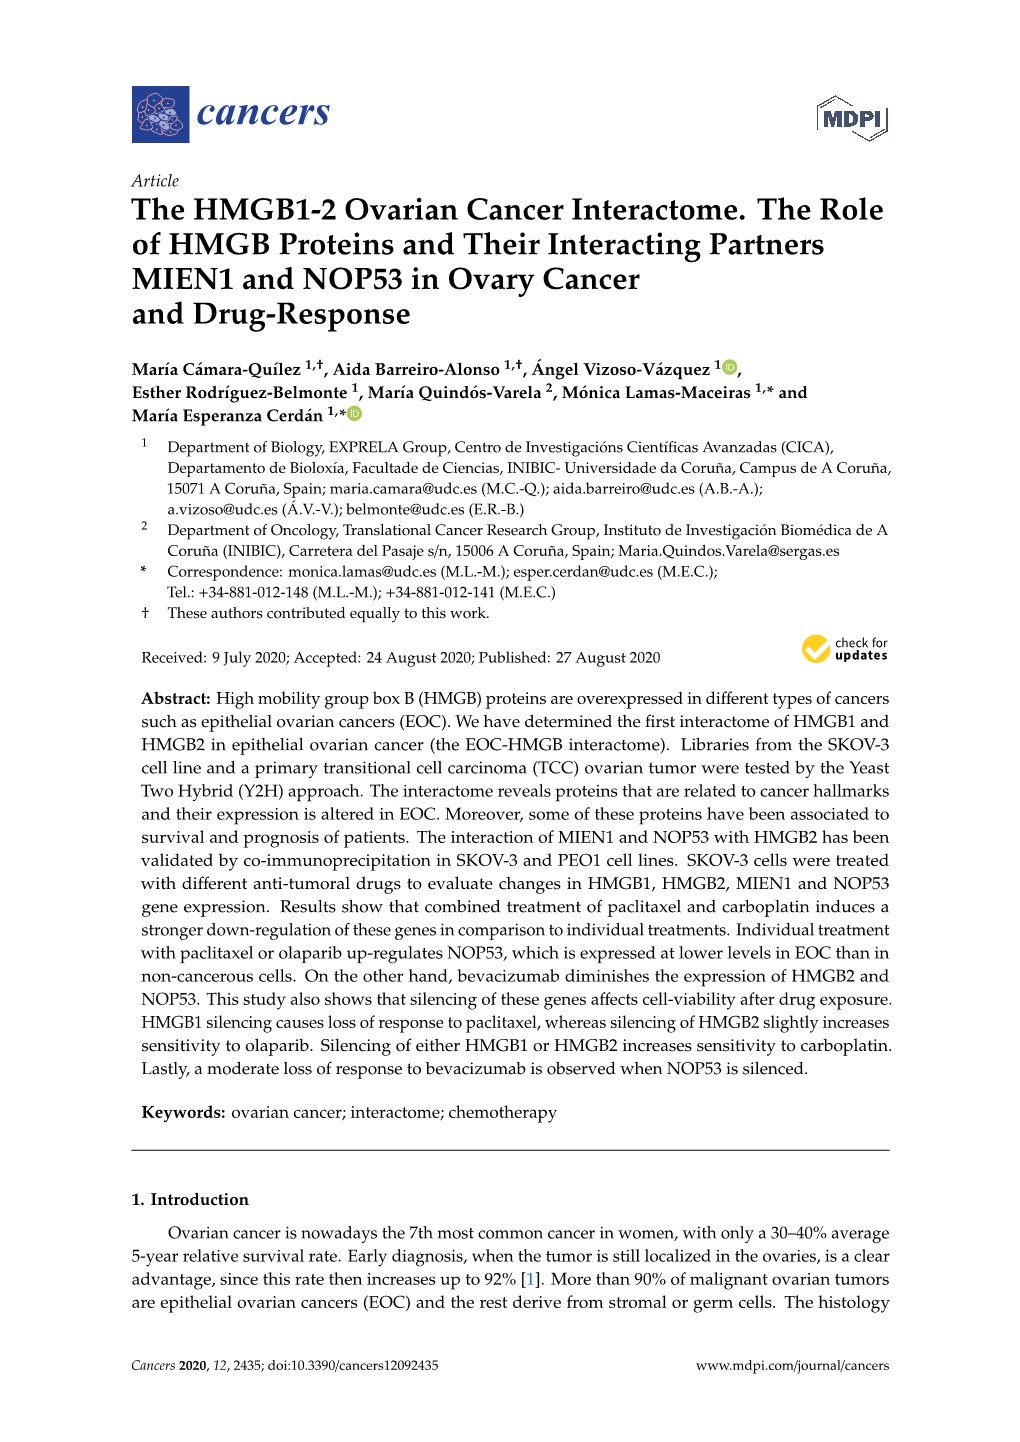 The HMGB1-2 Ovarian Cancer Interactome. the Role of HMGB Proteins and Their Interacting Partners MIEN1 and NOP53 in Ovary Cancer and Drug-Response